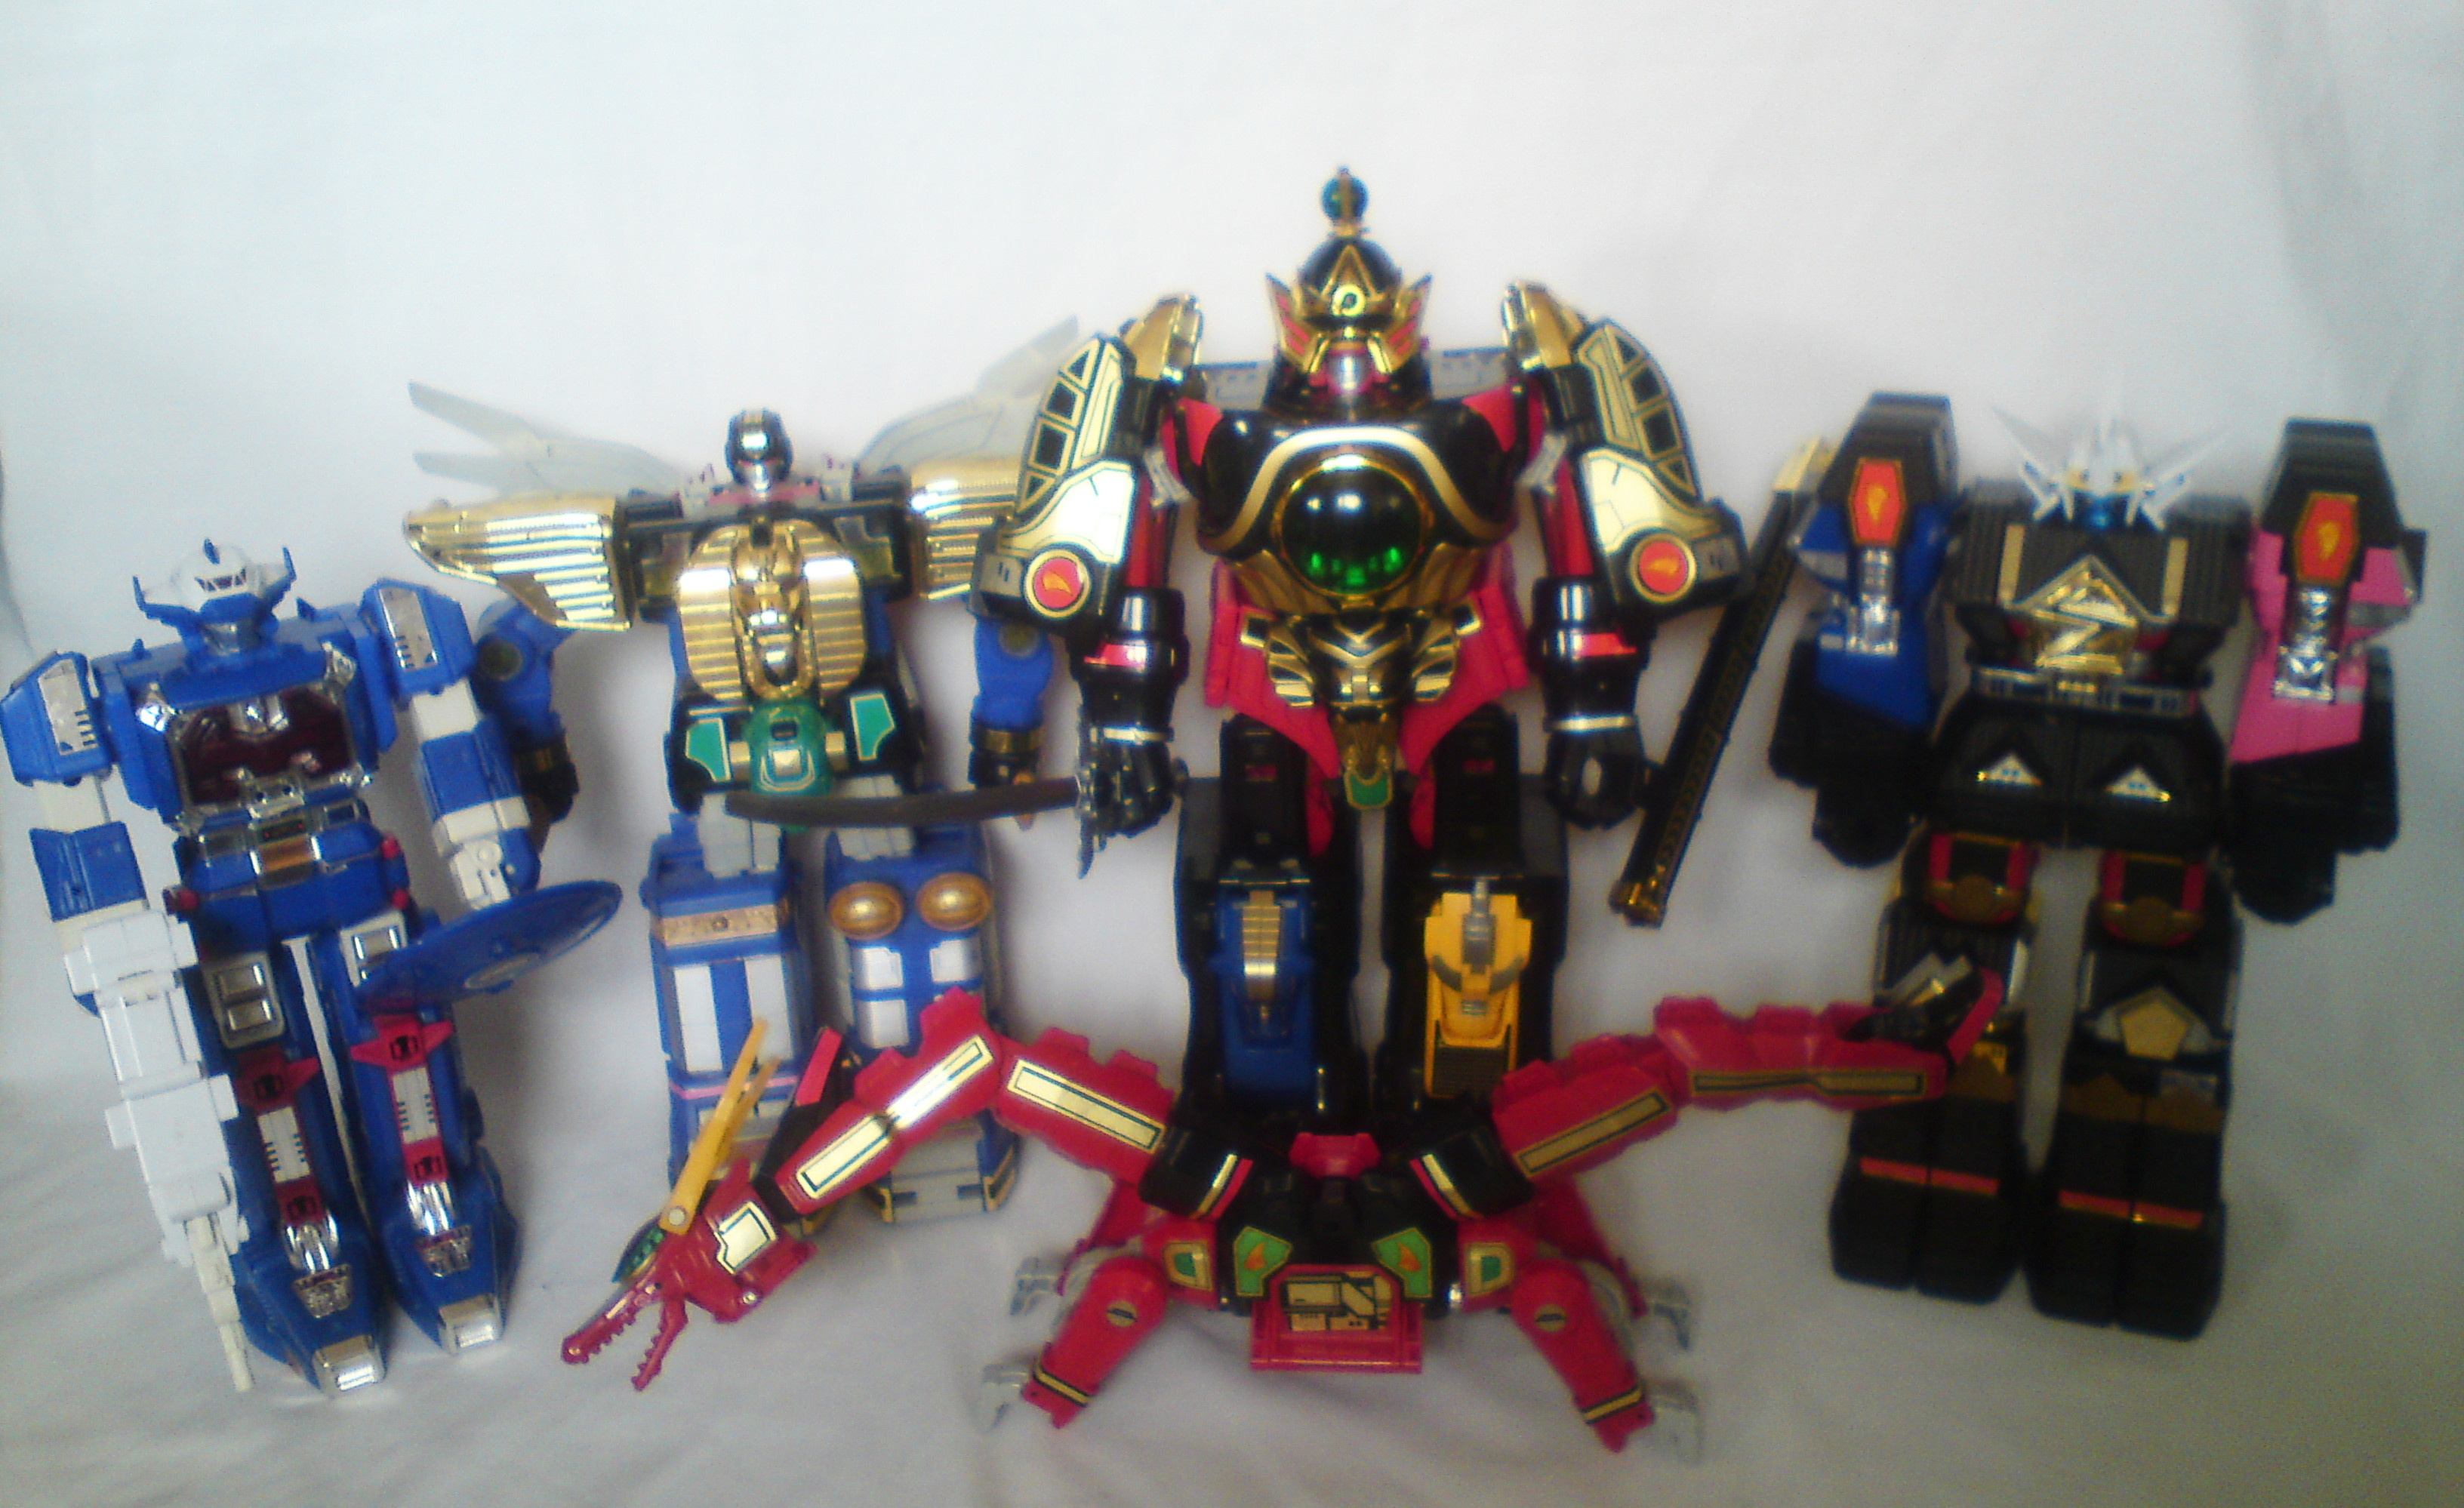 3264x1998 ... Megazord collection - Power Rangers by Harvy355